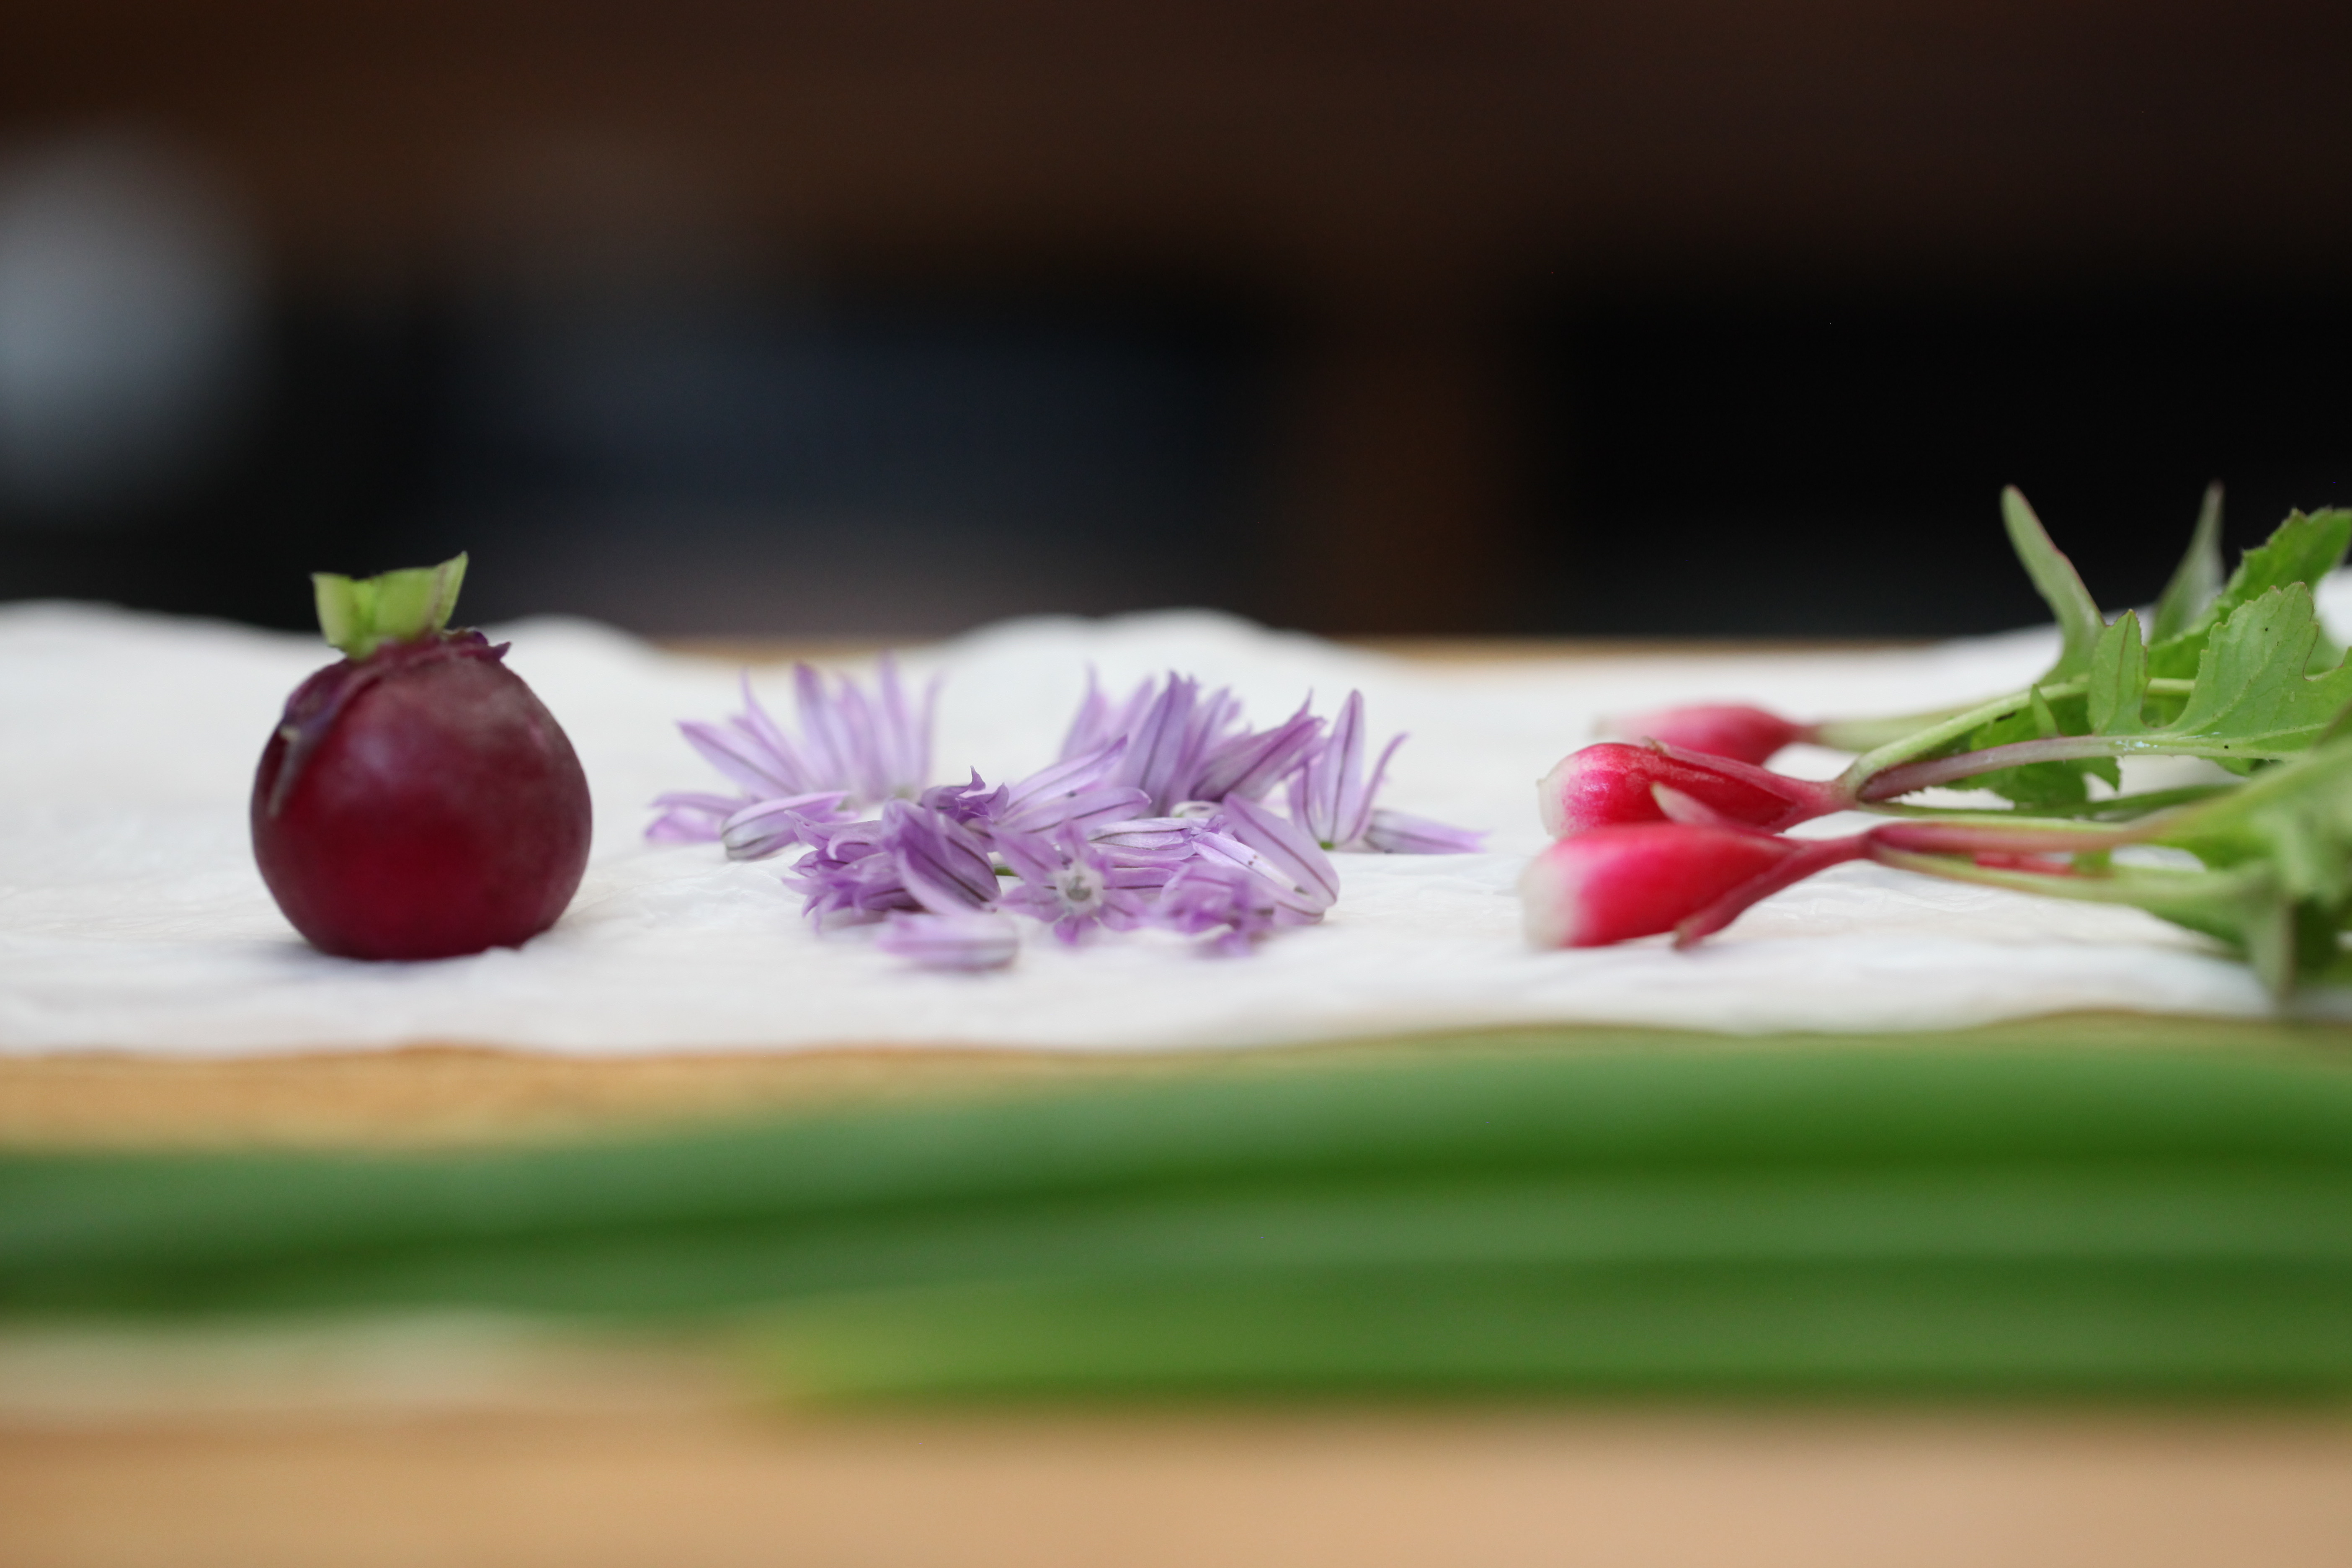 freshly picked radishes and chive blossoms on a paper towel in the munchies test kitchen